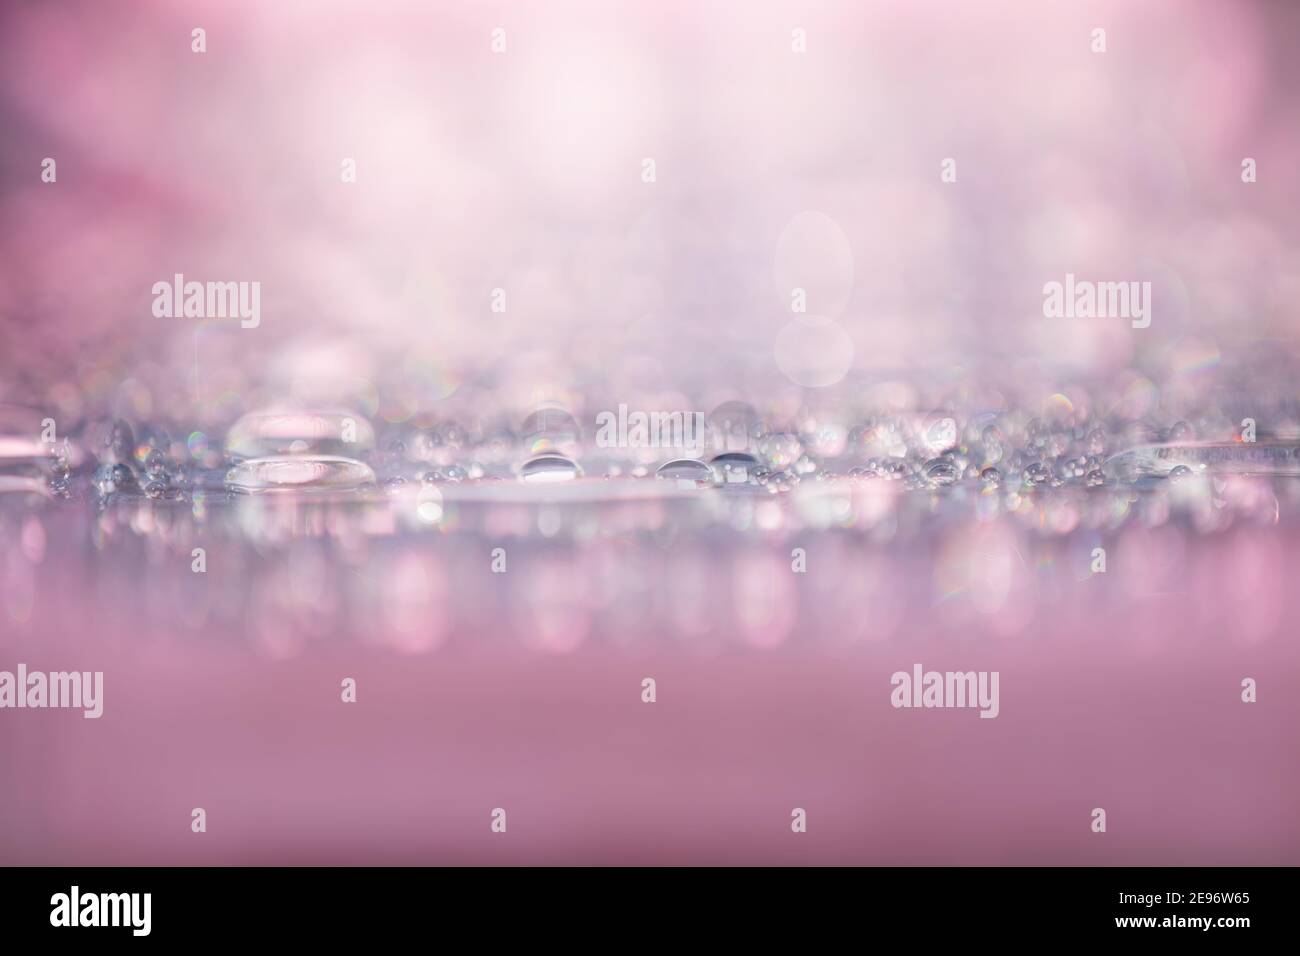 Water drops sparkling and twinkling on pink surface, abstract background Stock Photo